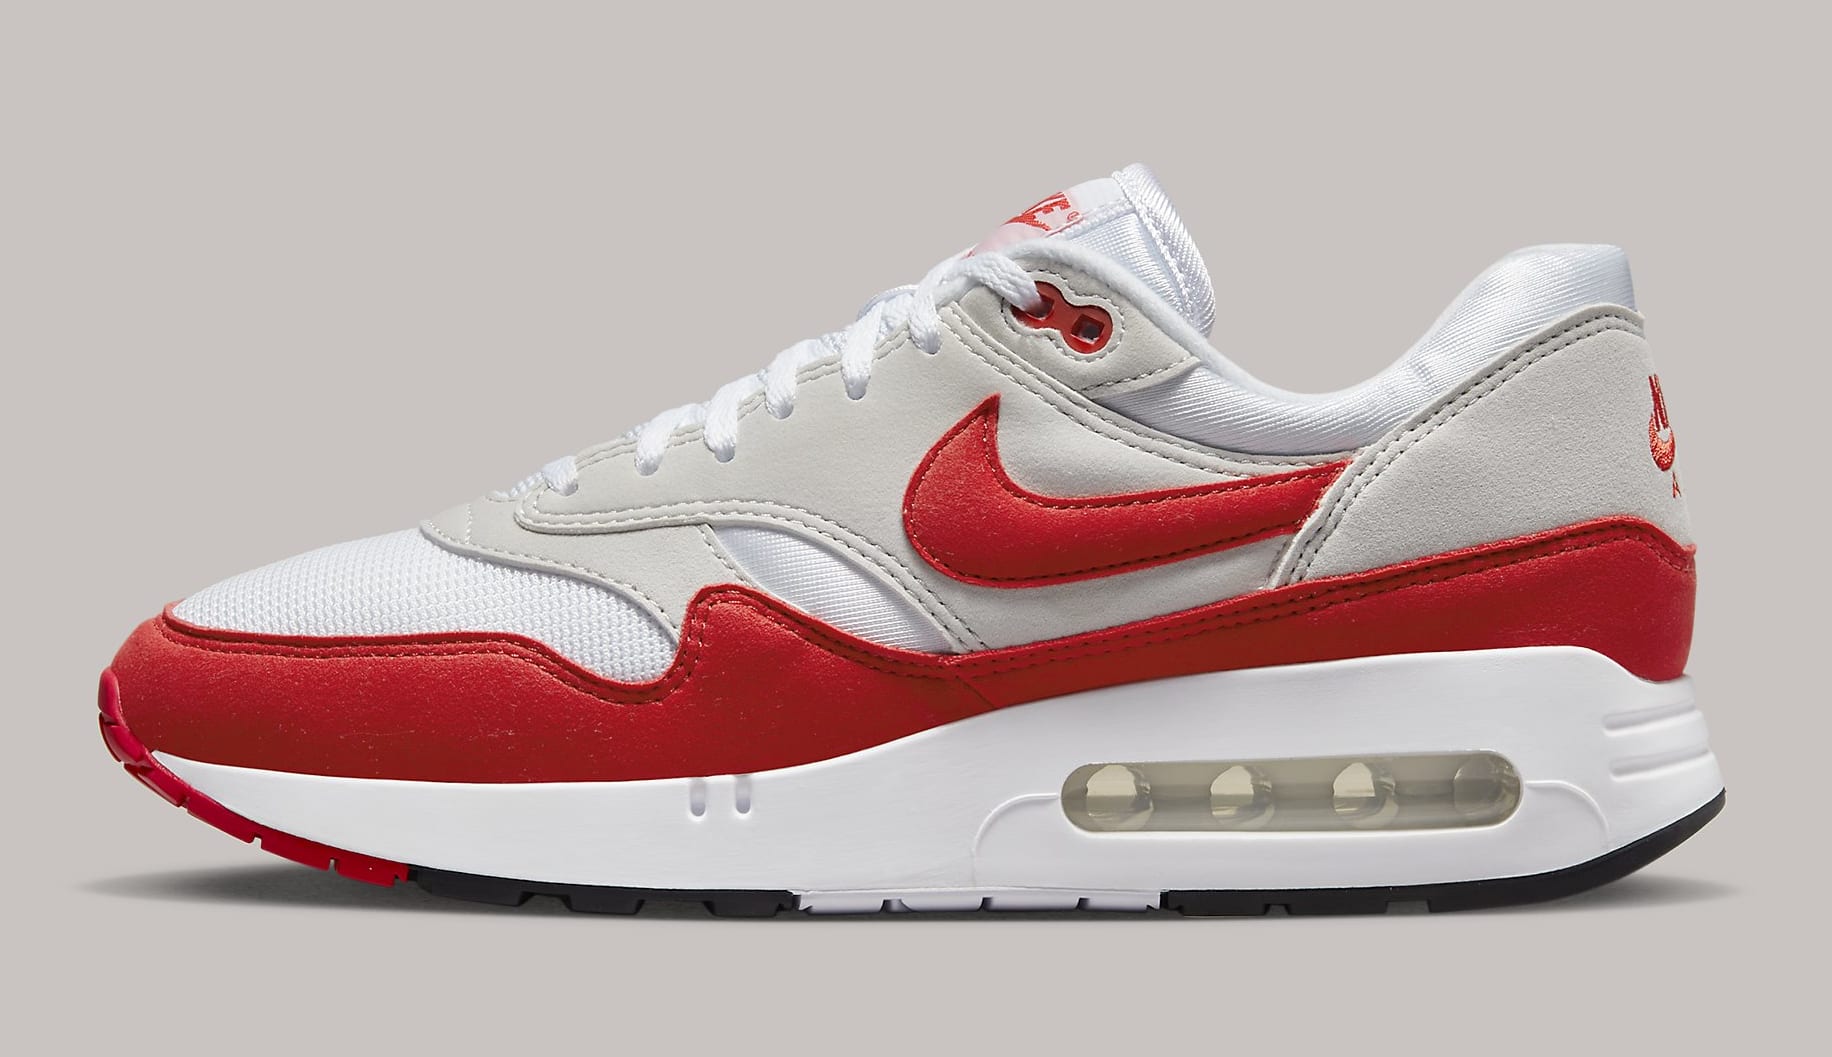 The Air Max 1 OG Big Bubble Returns After 37 Years